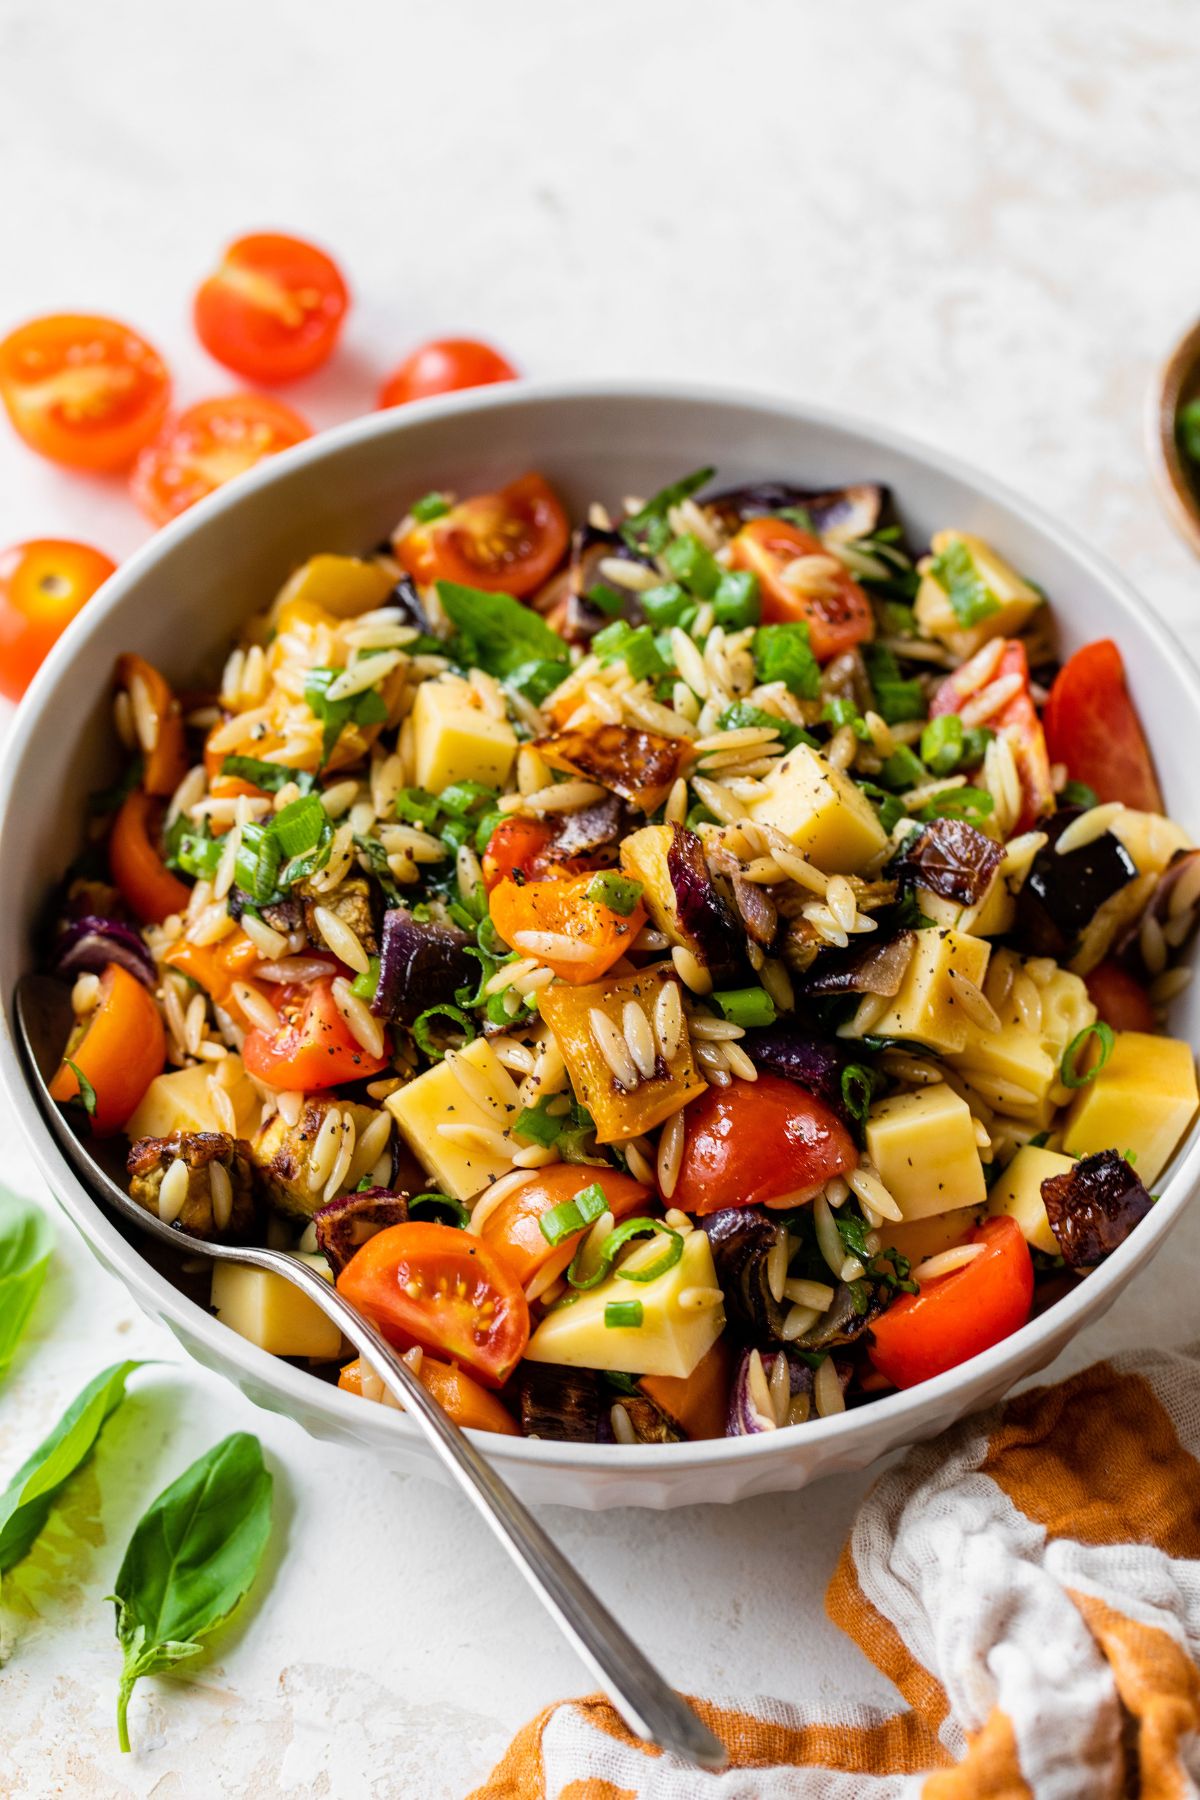 Orzo pasta salad with roasted veggies in a white bowl.